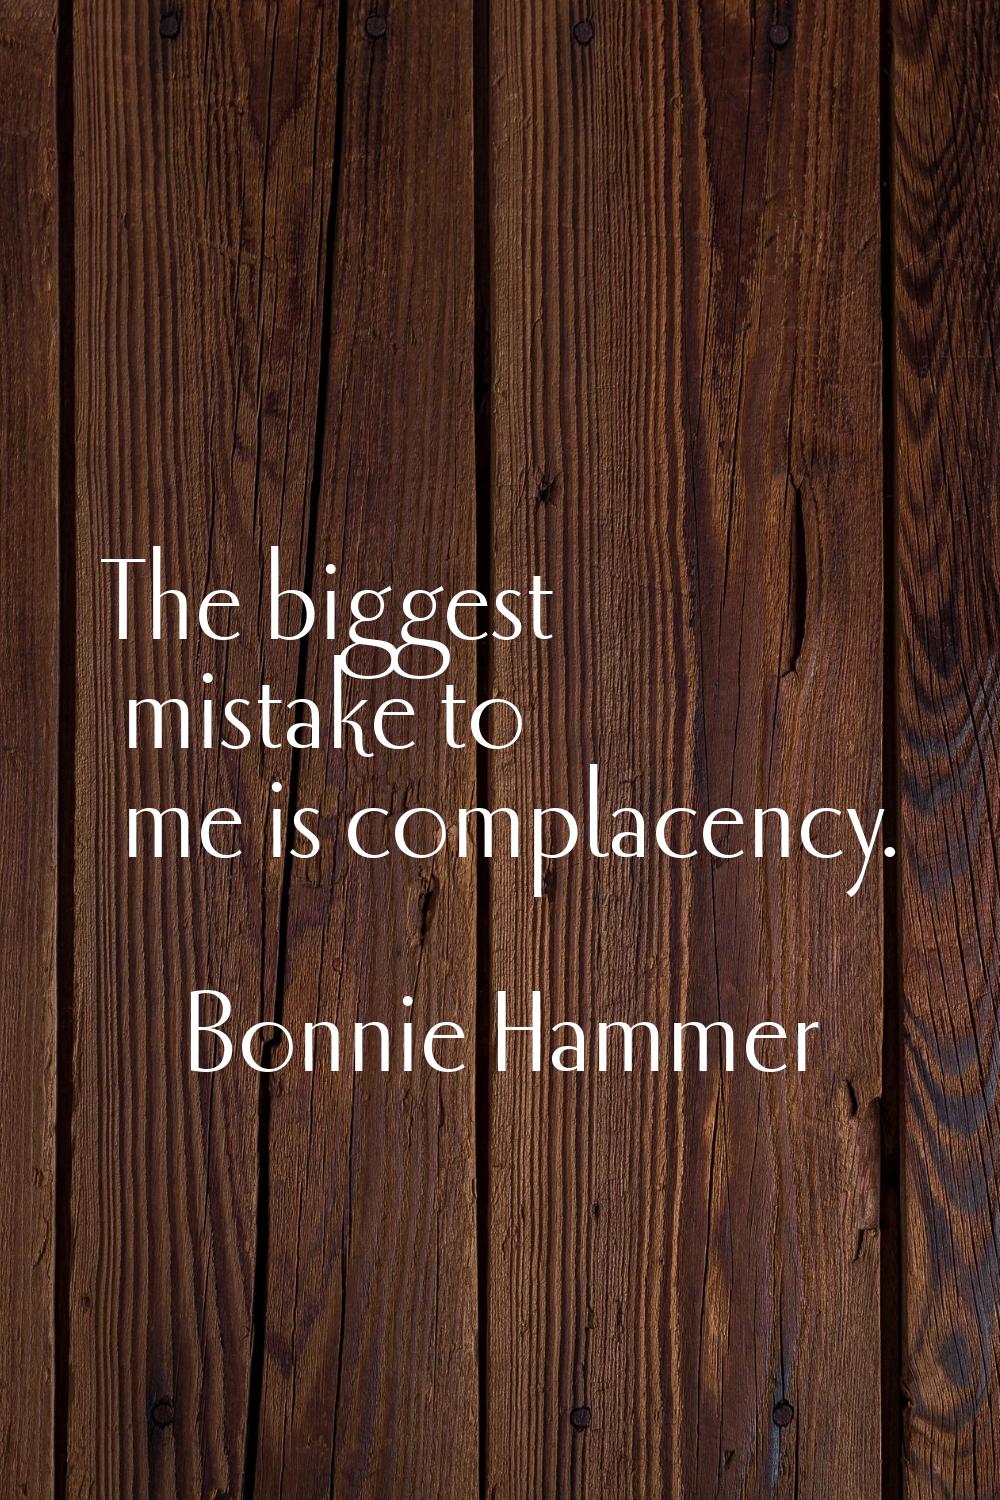 The biggest mistake to me is complacency.